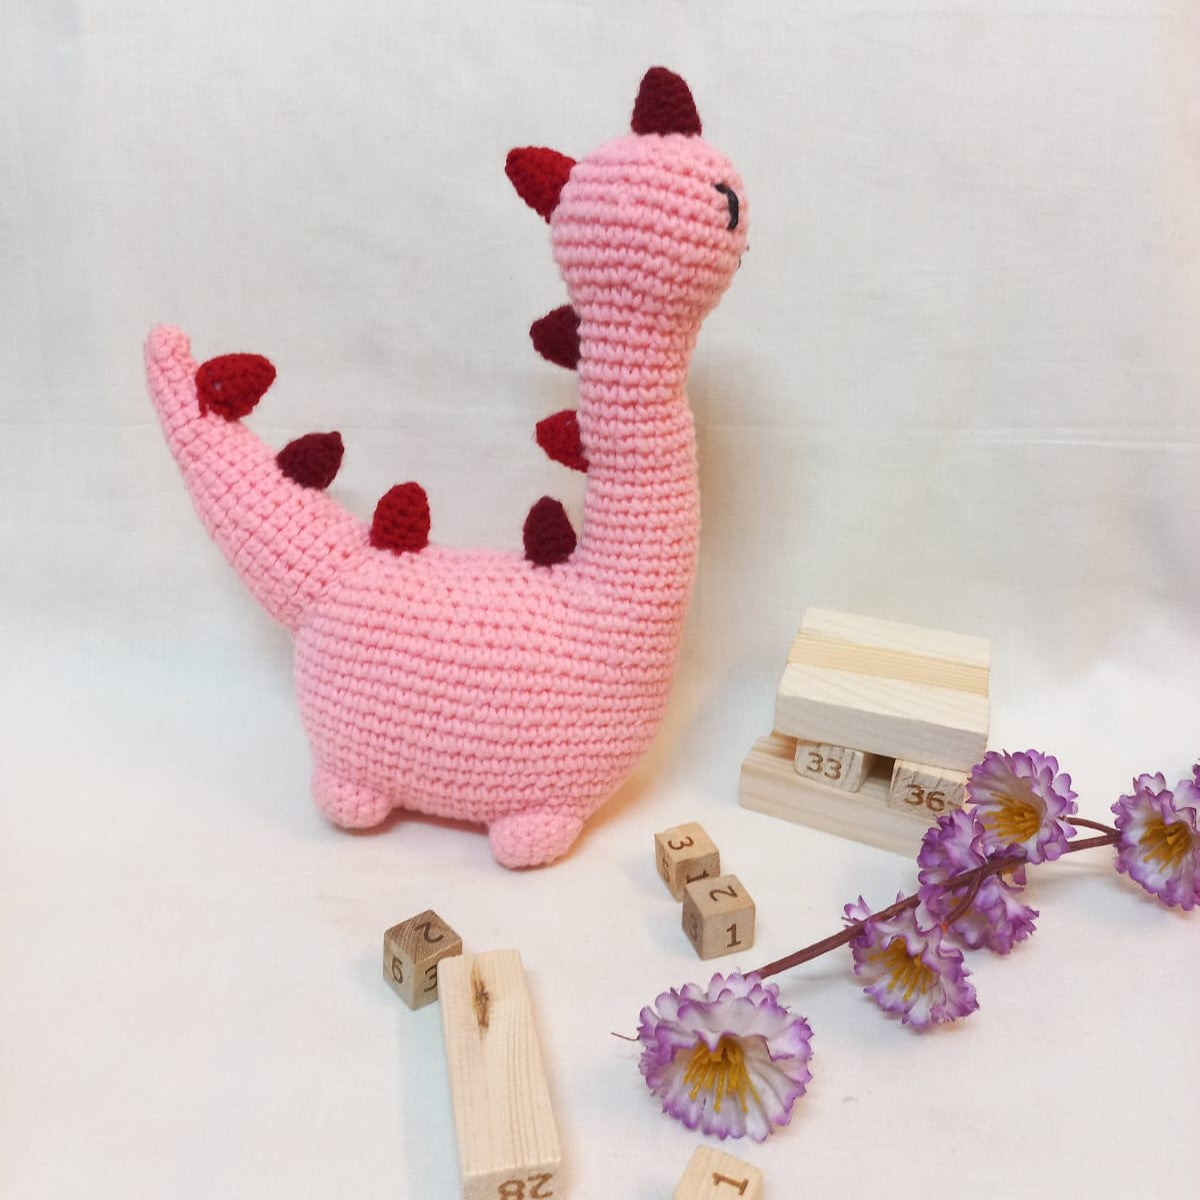 Brachiosaurus Amigurumi Soft Toy: A Cute and Cuddly Dinosaur for Kids of All Ages